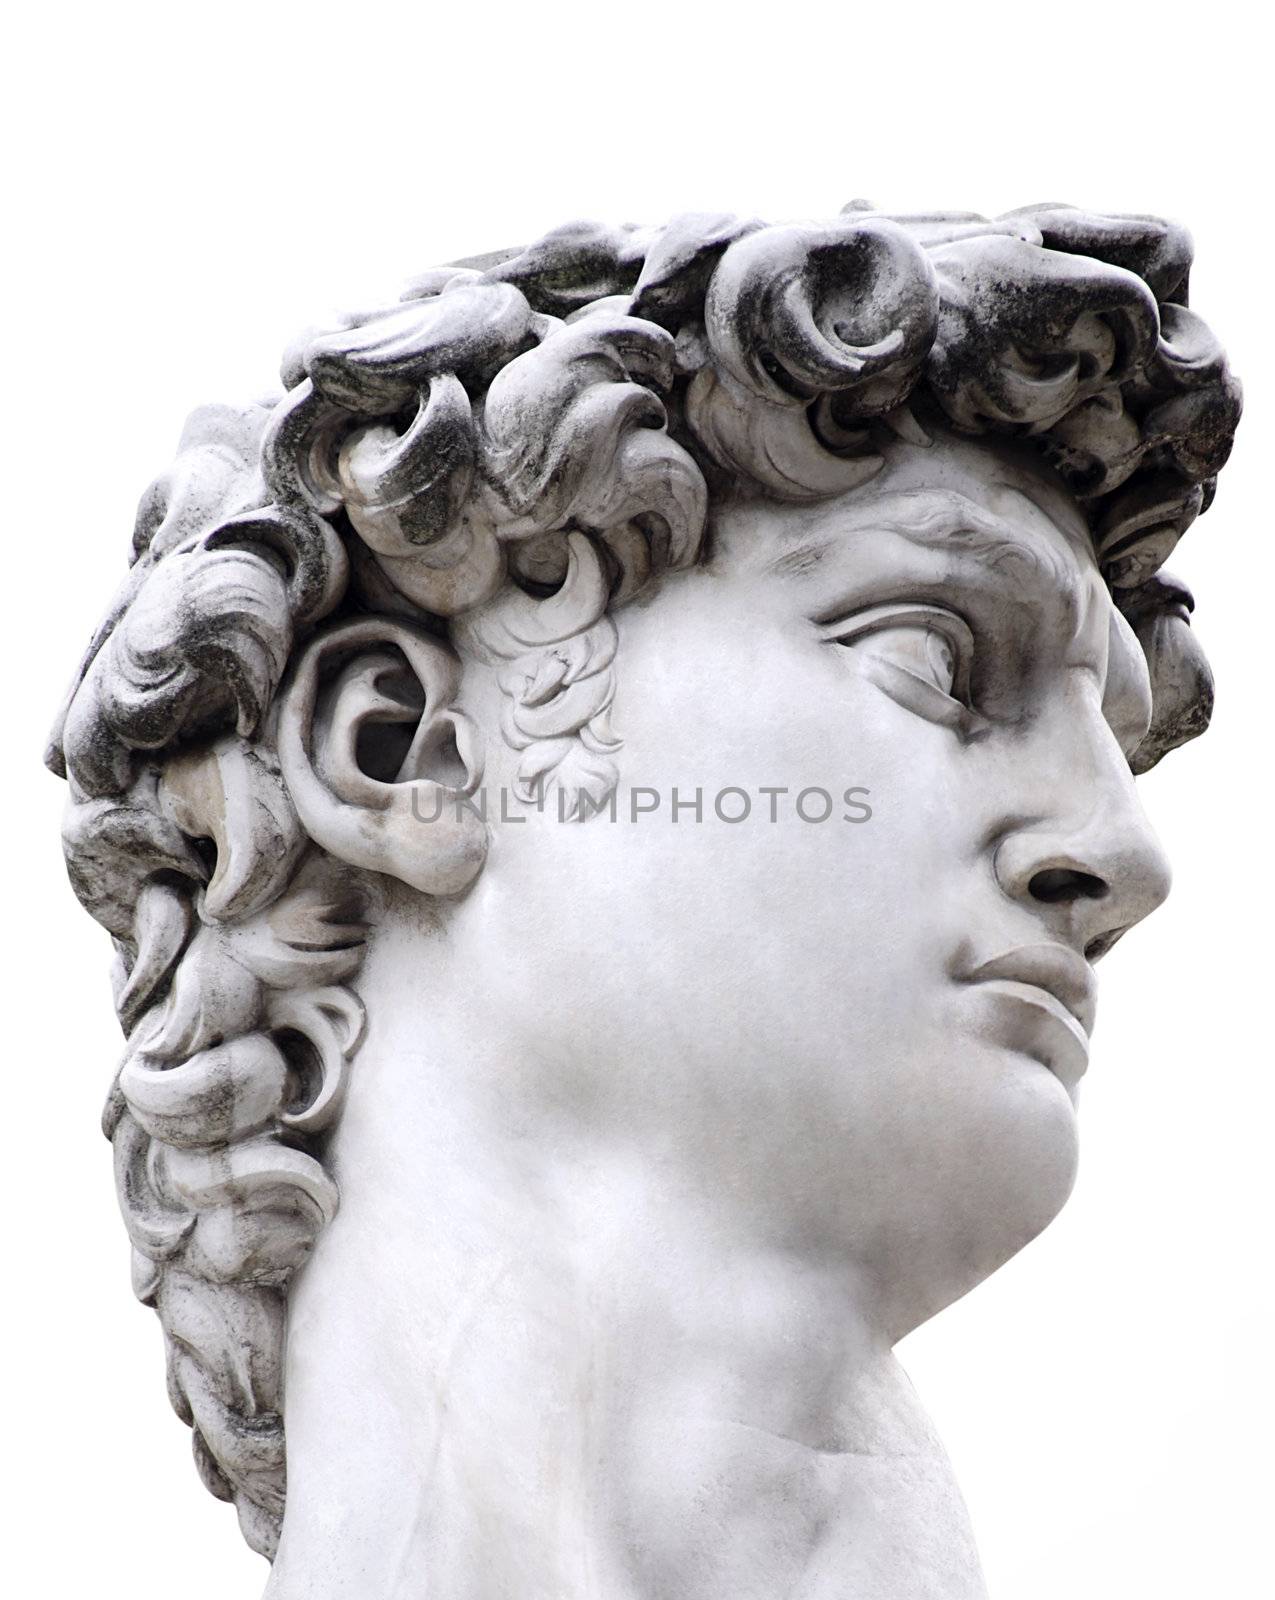 Head of a famous statue by Michelangelo - David from Florence, isolated on white with clipping path